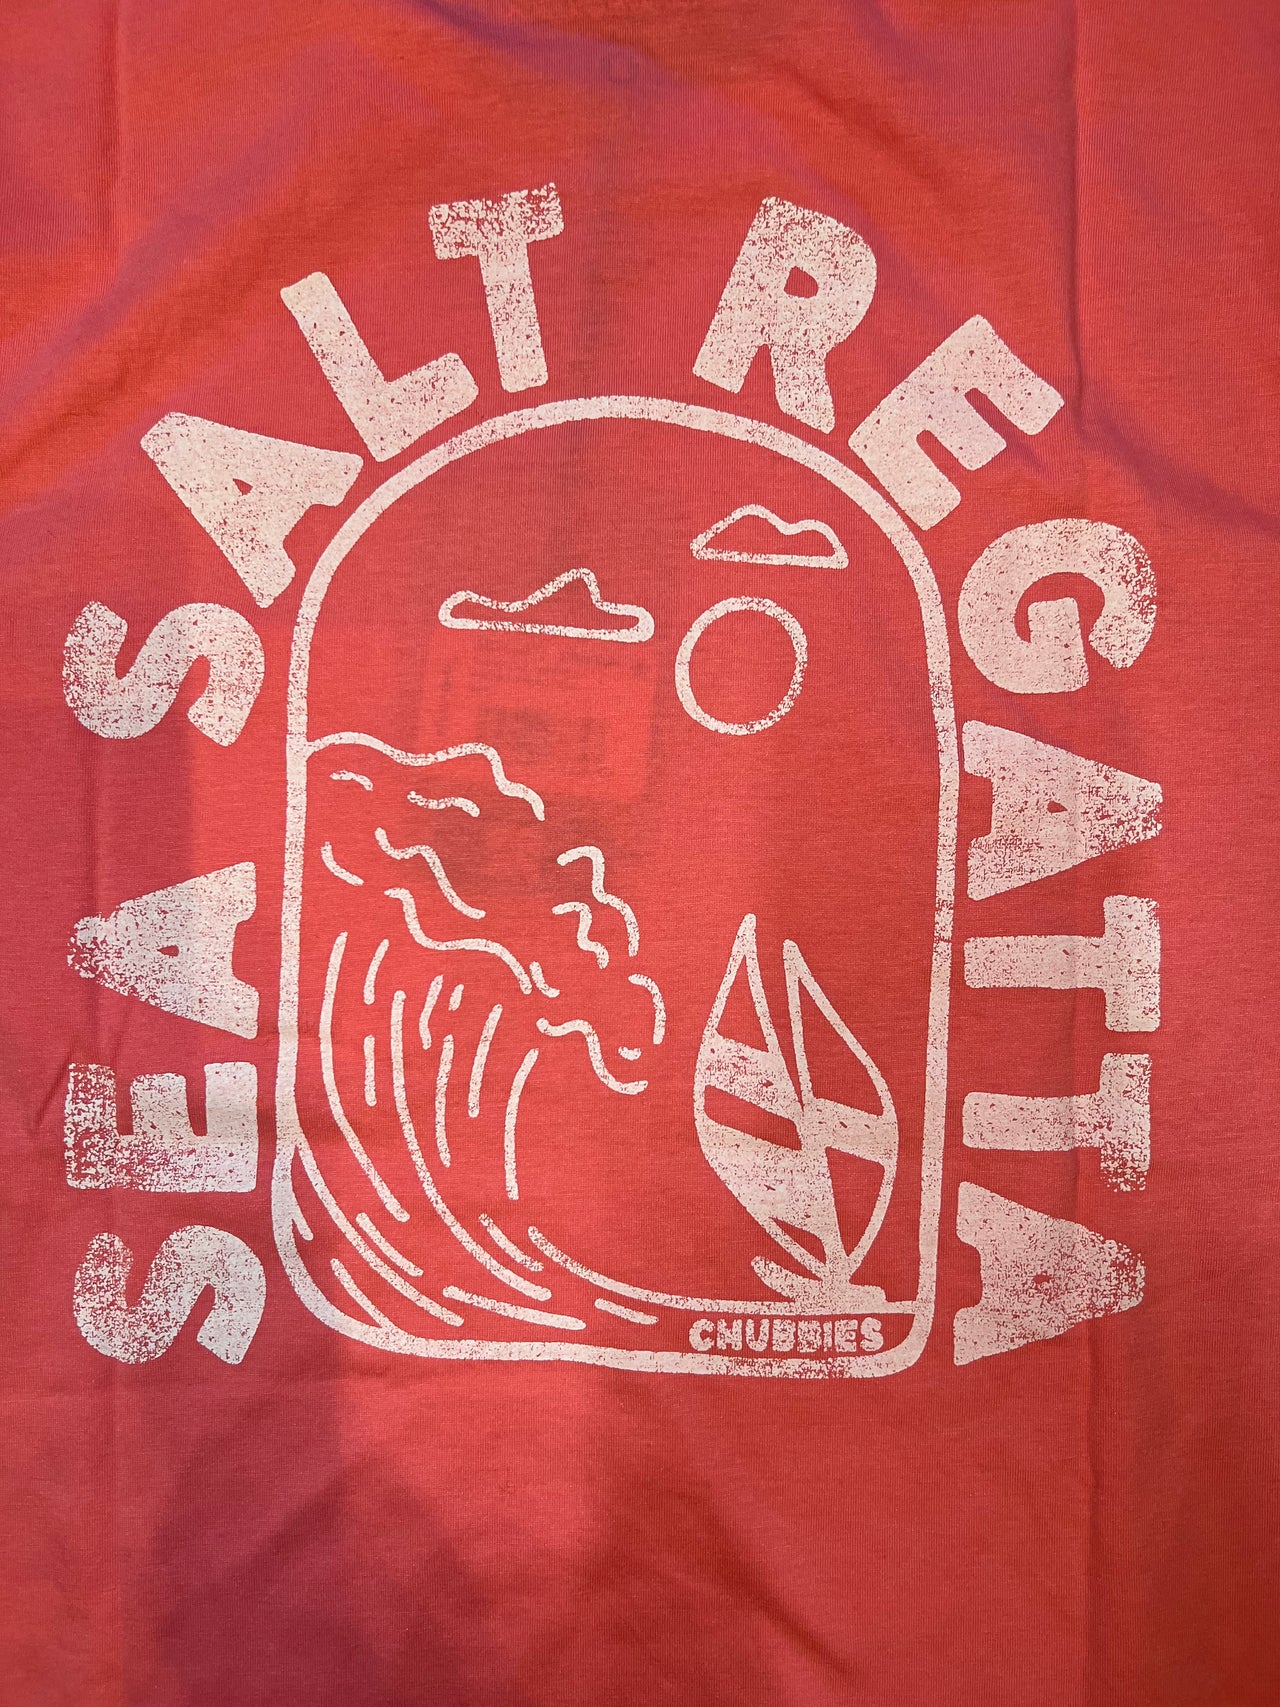  "Chubbies Sea Salt Regatta Pink Short Sleeve Pocket T-Shirt - A soft and durable cotton tee in a refreshing sea salt pink hue. Features a tailored fit, classic crew neckline, and a functional pocket for a touch of nautical charm. Perfect for laid-back style and seaside adventures."